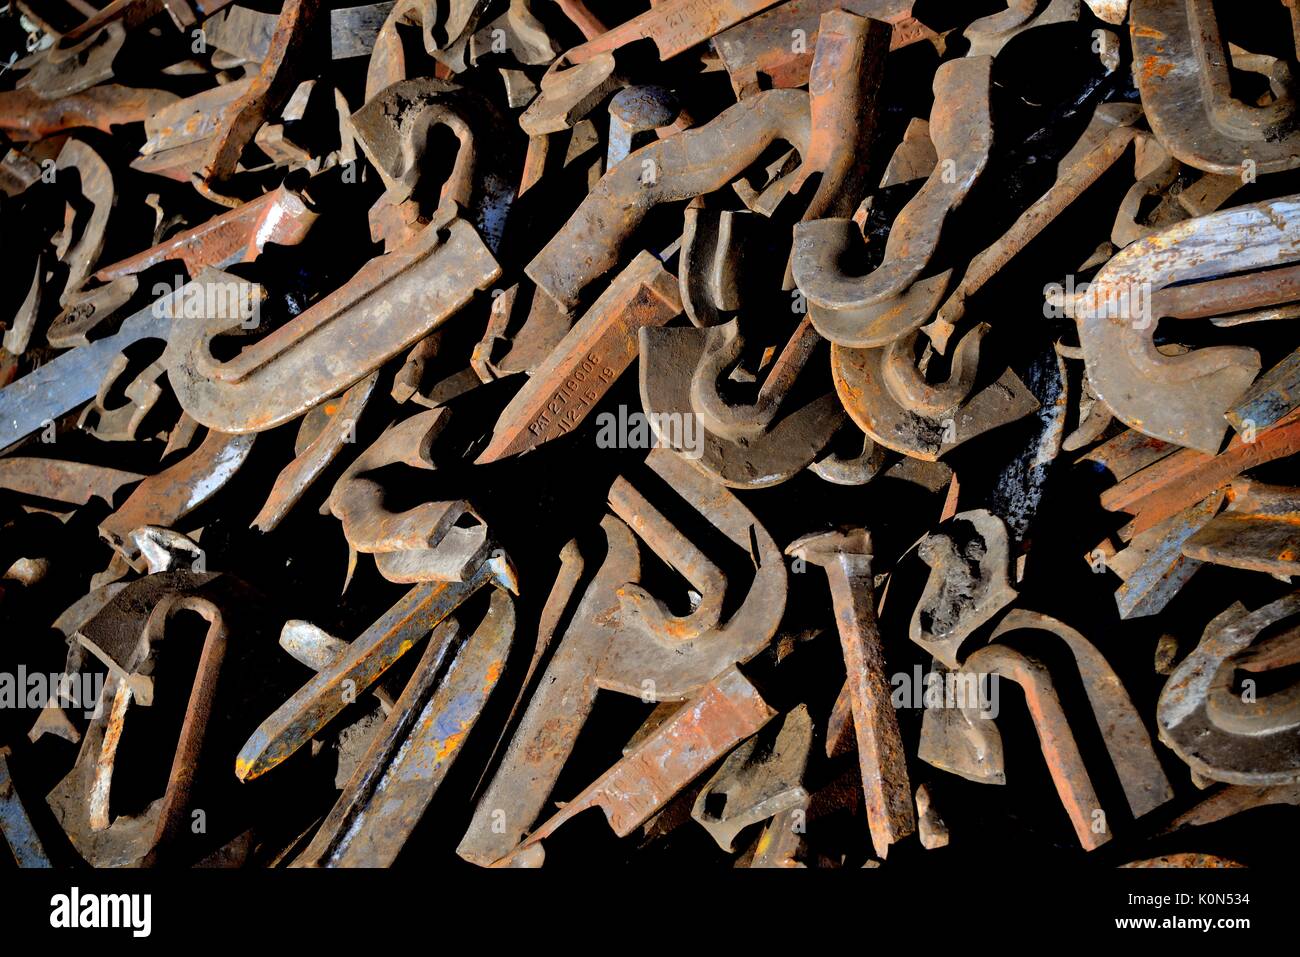 Rusted pile of railroad track spikes and anchors Stock Photo